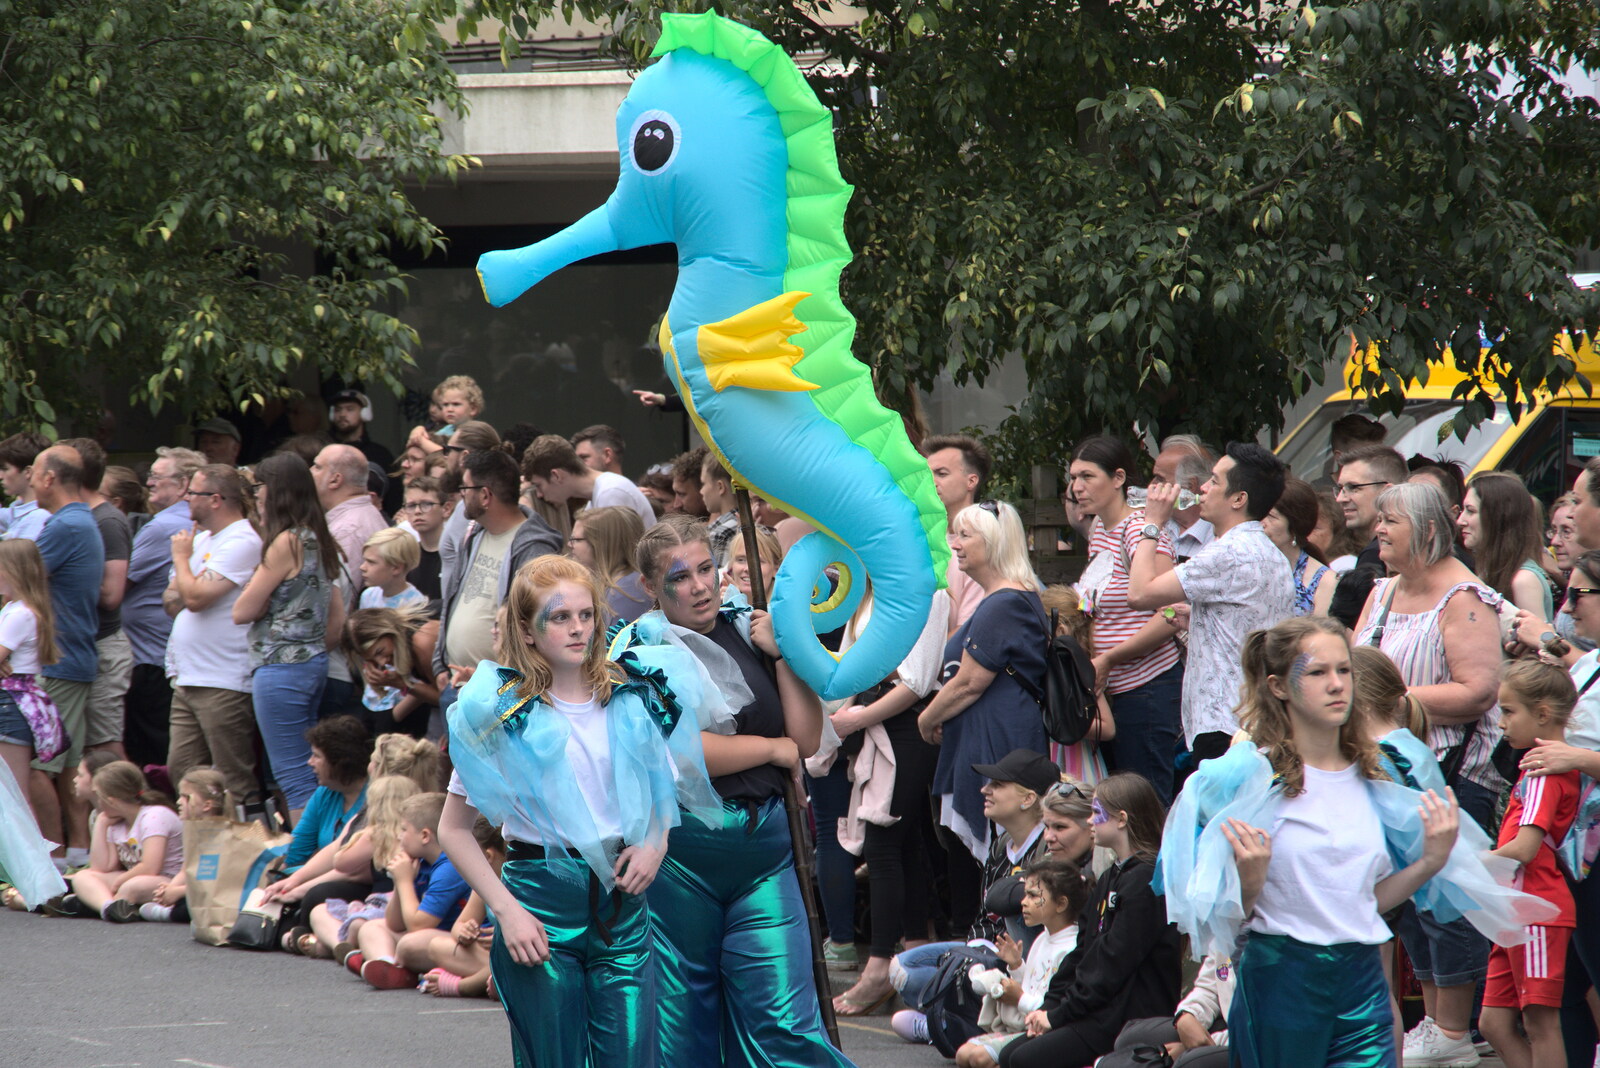 An inflatable sea horse on a stick from The Lord Mayor's Procession, Norwich, Norfolk - 2nd July 2022